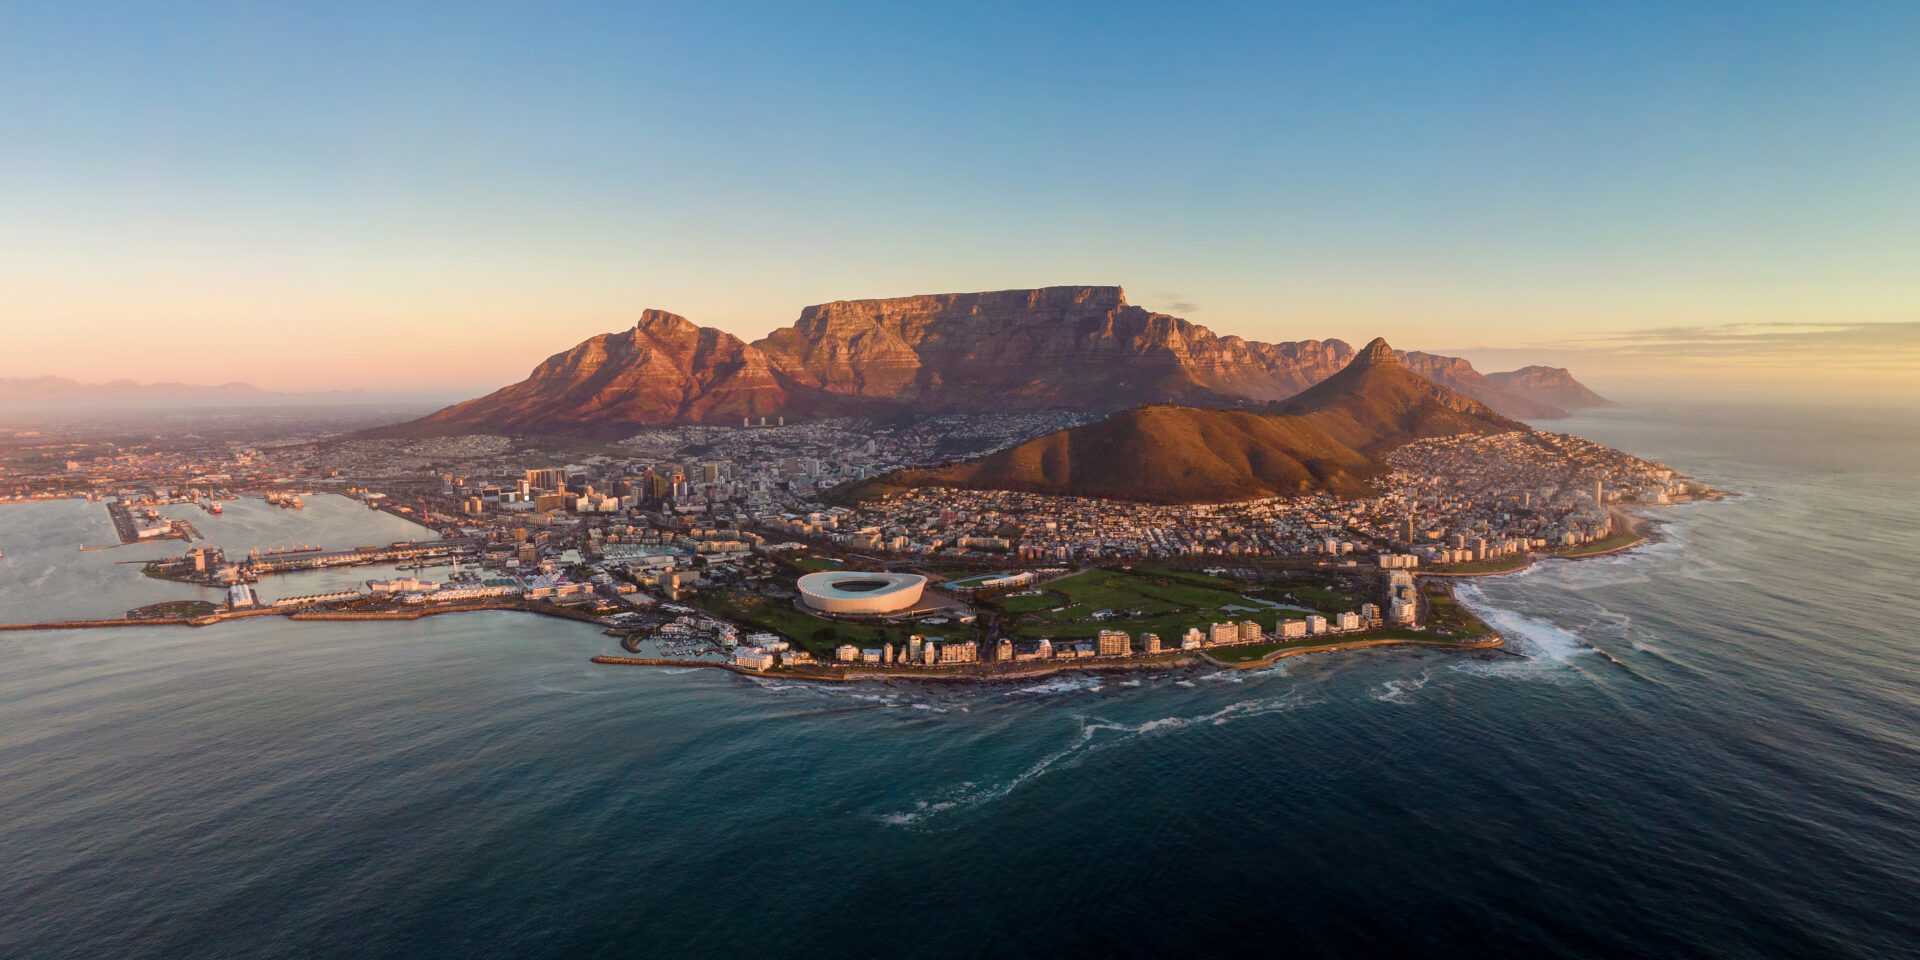 A helicopter view of Cape Town at sunset, displaying the mountains, city centre, Green Point stadium and ocean around it